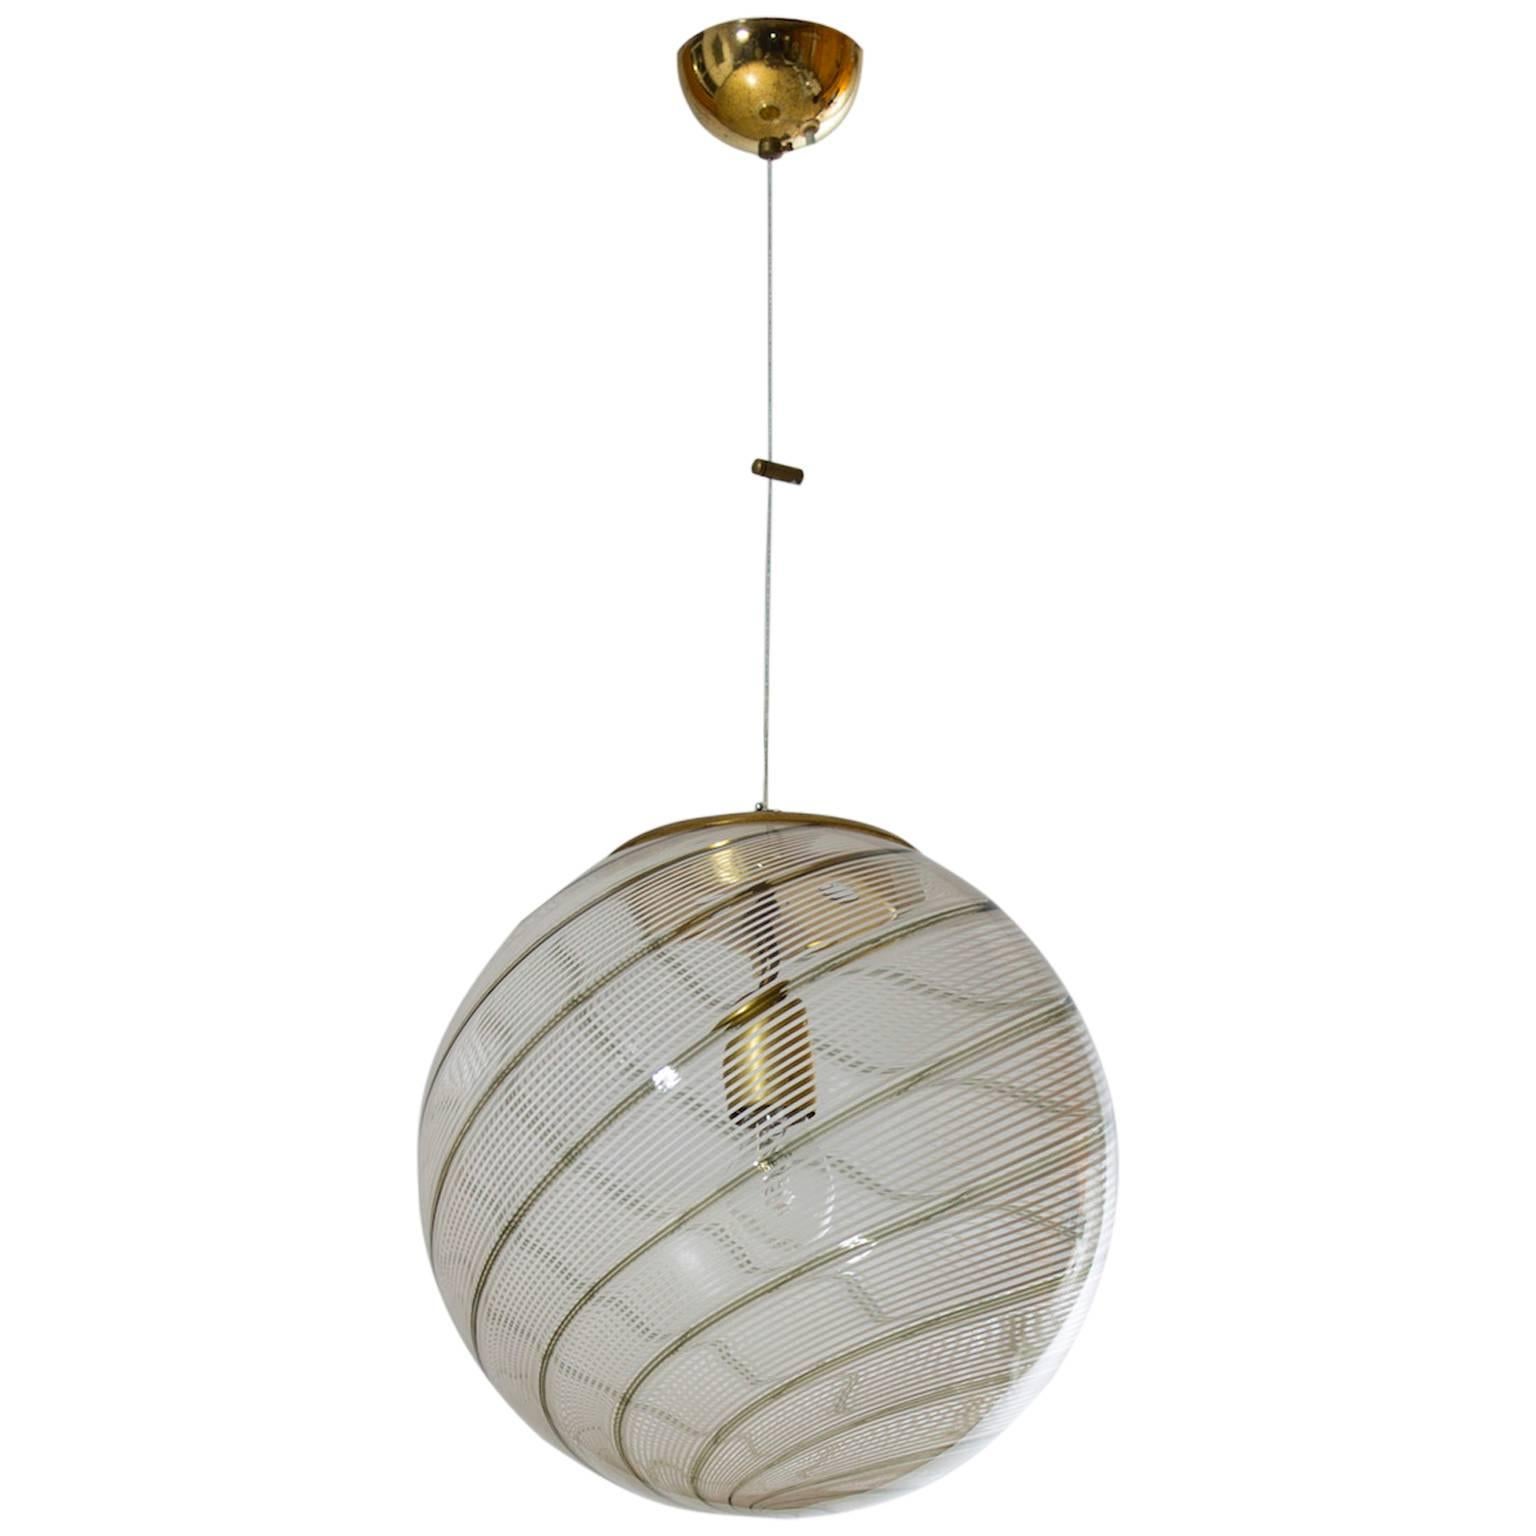 Vintage Murano Fixture: Clear Glass Sphere with Accented Stripes 1960s Italy